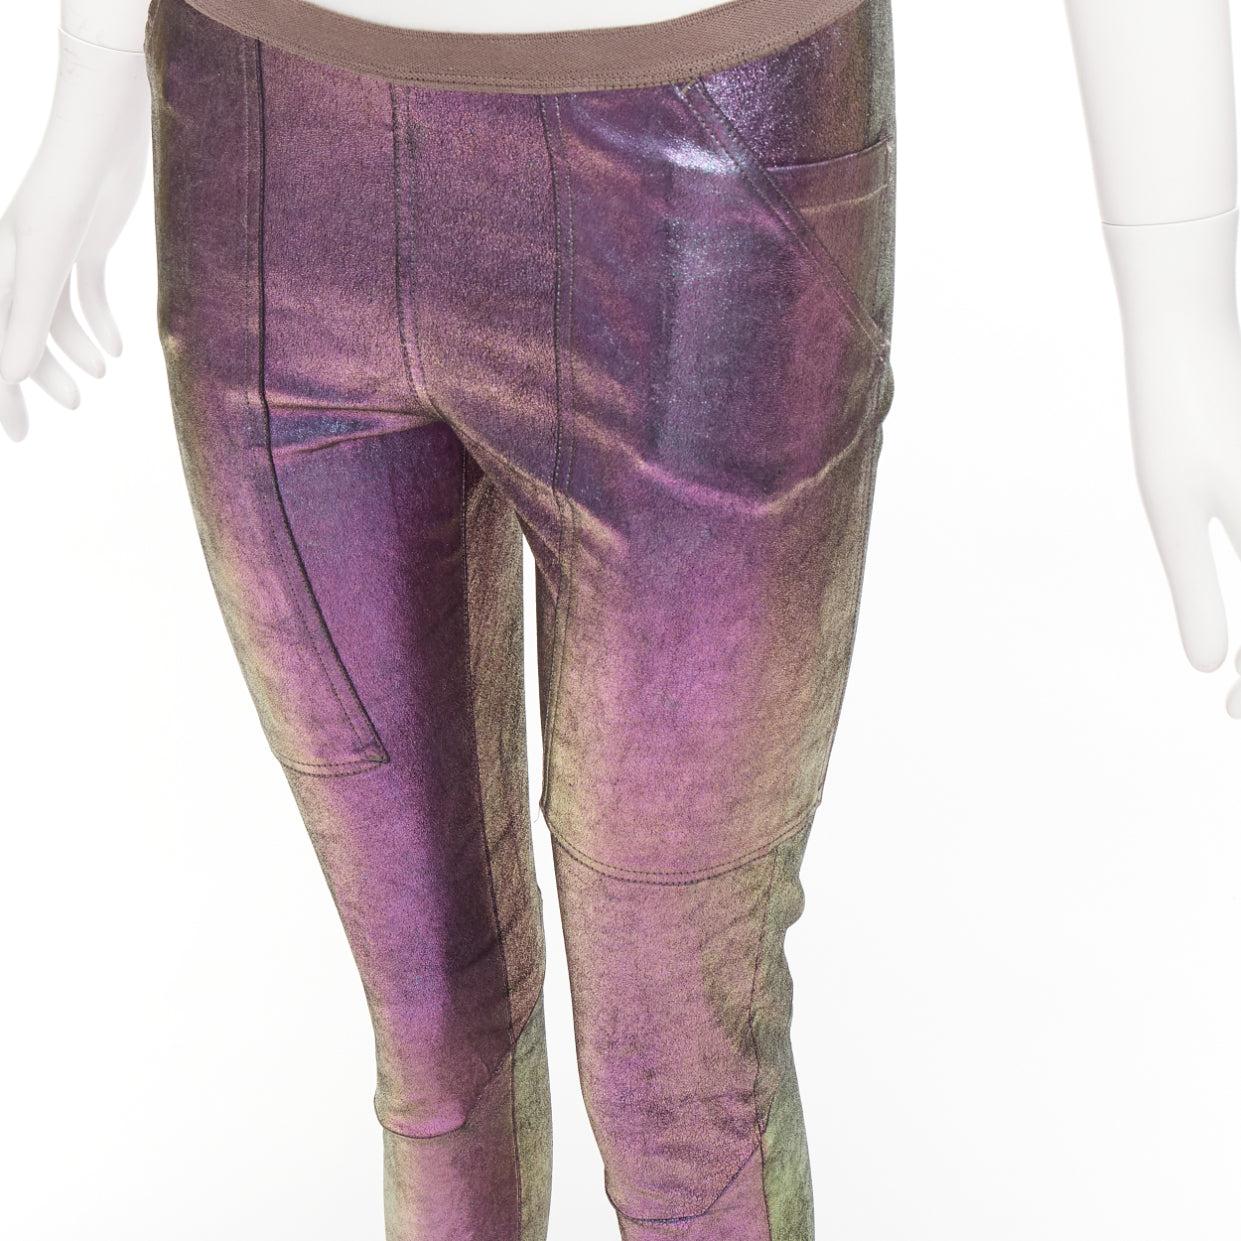 RICK OWENS 2020 Tecuatl iridescent purple leather legging pants IT38 XS
Reference: AAWC/A01162
Brand: Rick Owens
Designer: Rick Owens
Model: Tecuatl
Collection: 2020
Material: Leather, Cotton, Blend
Color: Purple
Pattern: Solid
Closure: